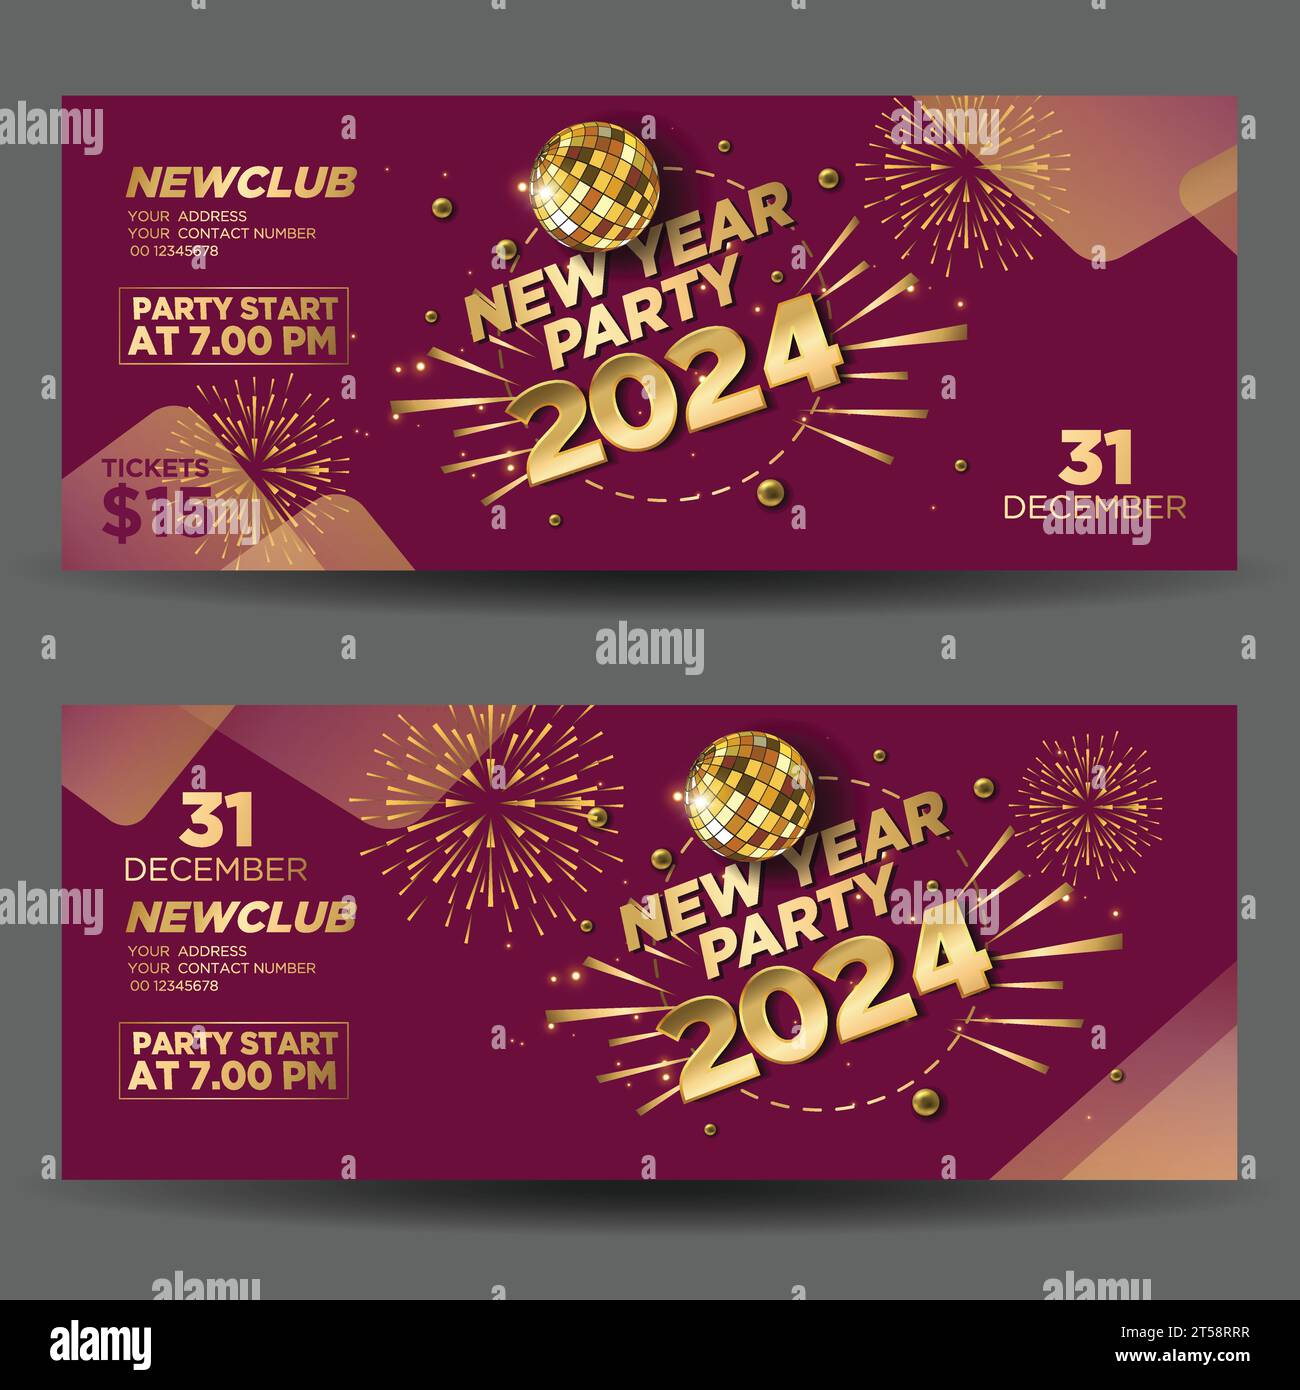 Chinese New Year 2022 Square Banner Template